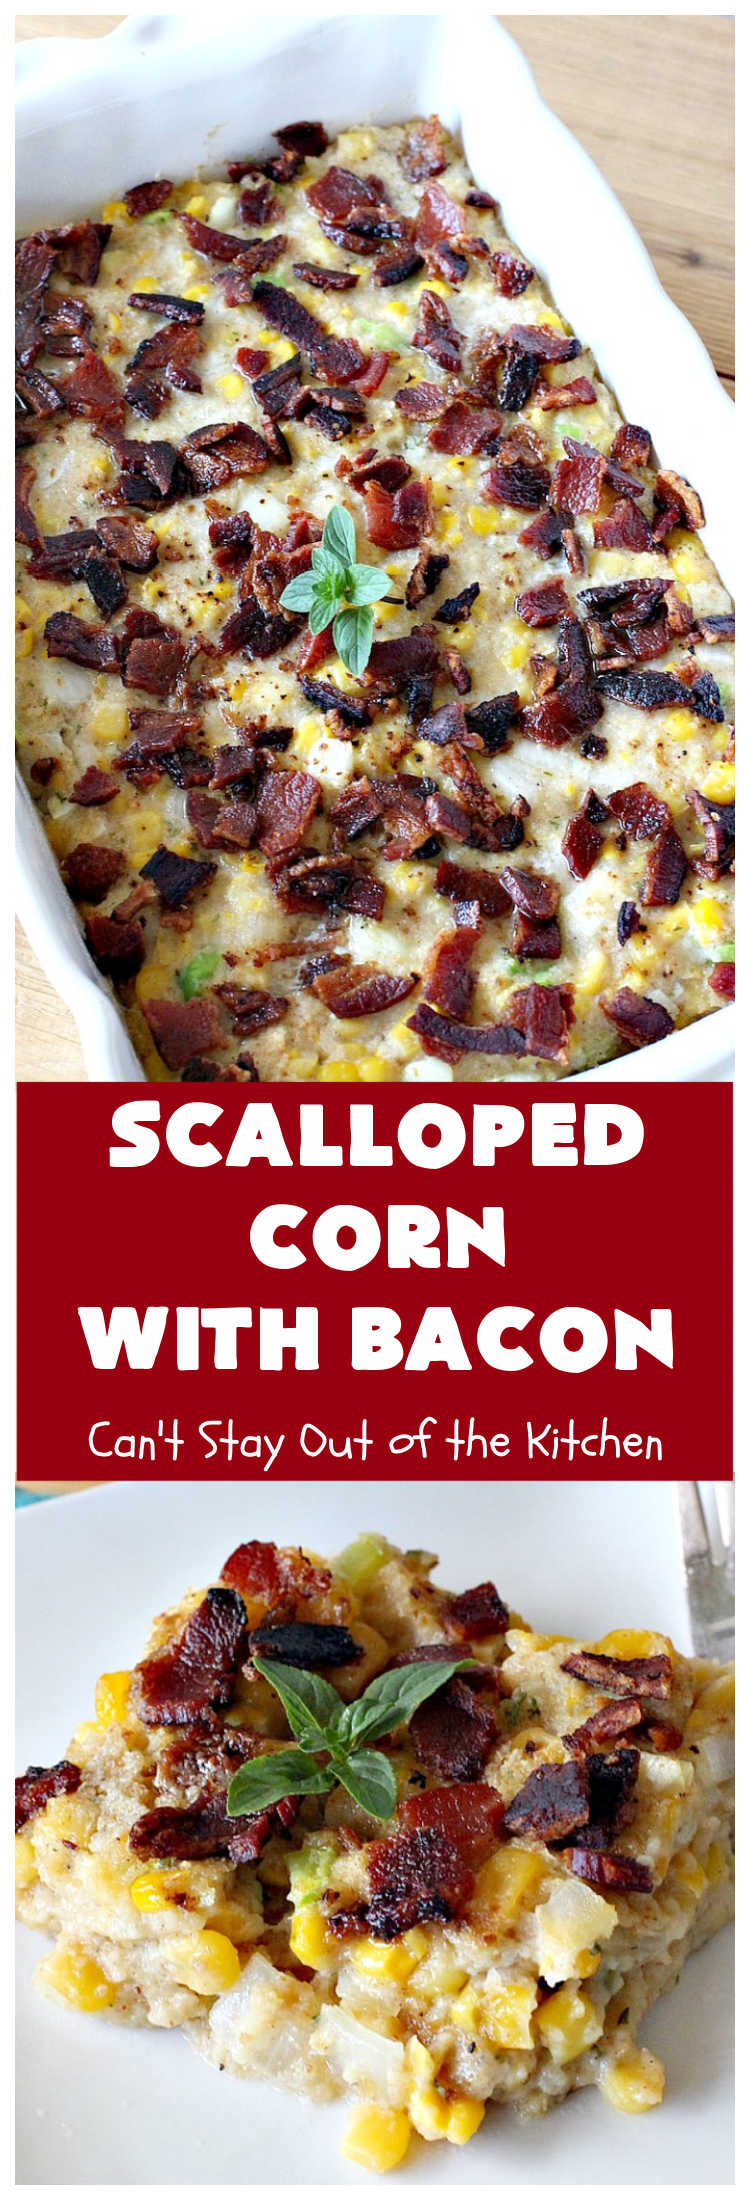 Scalloped Corn with Bacon | Can't Stay Out of the Kitchen | this fantastic #GooseberryPatch #recipe is absolutely mouthwatering & delicious. Yes, #bacon makes everything better! It's perfect for your #holiday or company dinners since it's really easy to assemble & it always rates 5 stars when I make it. #corn #ScallopedCornWithBacon #HolidayCasserole #HolidaySideDish #ScallopedCorn